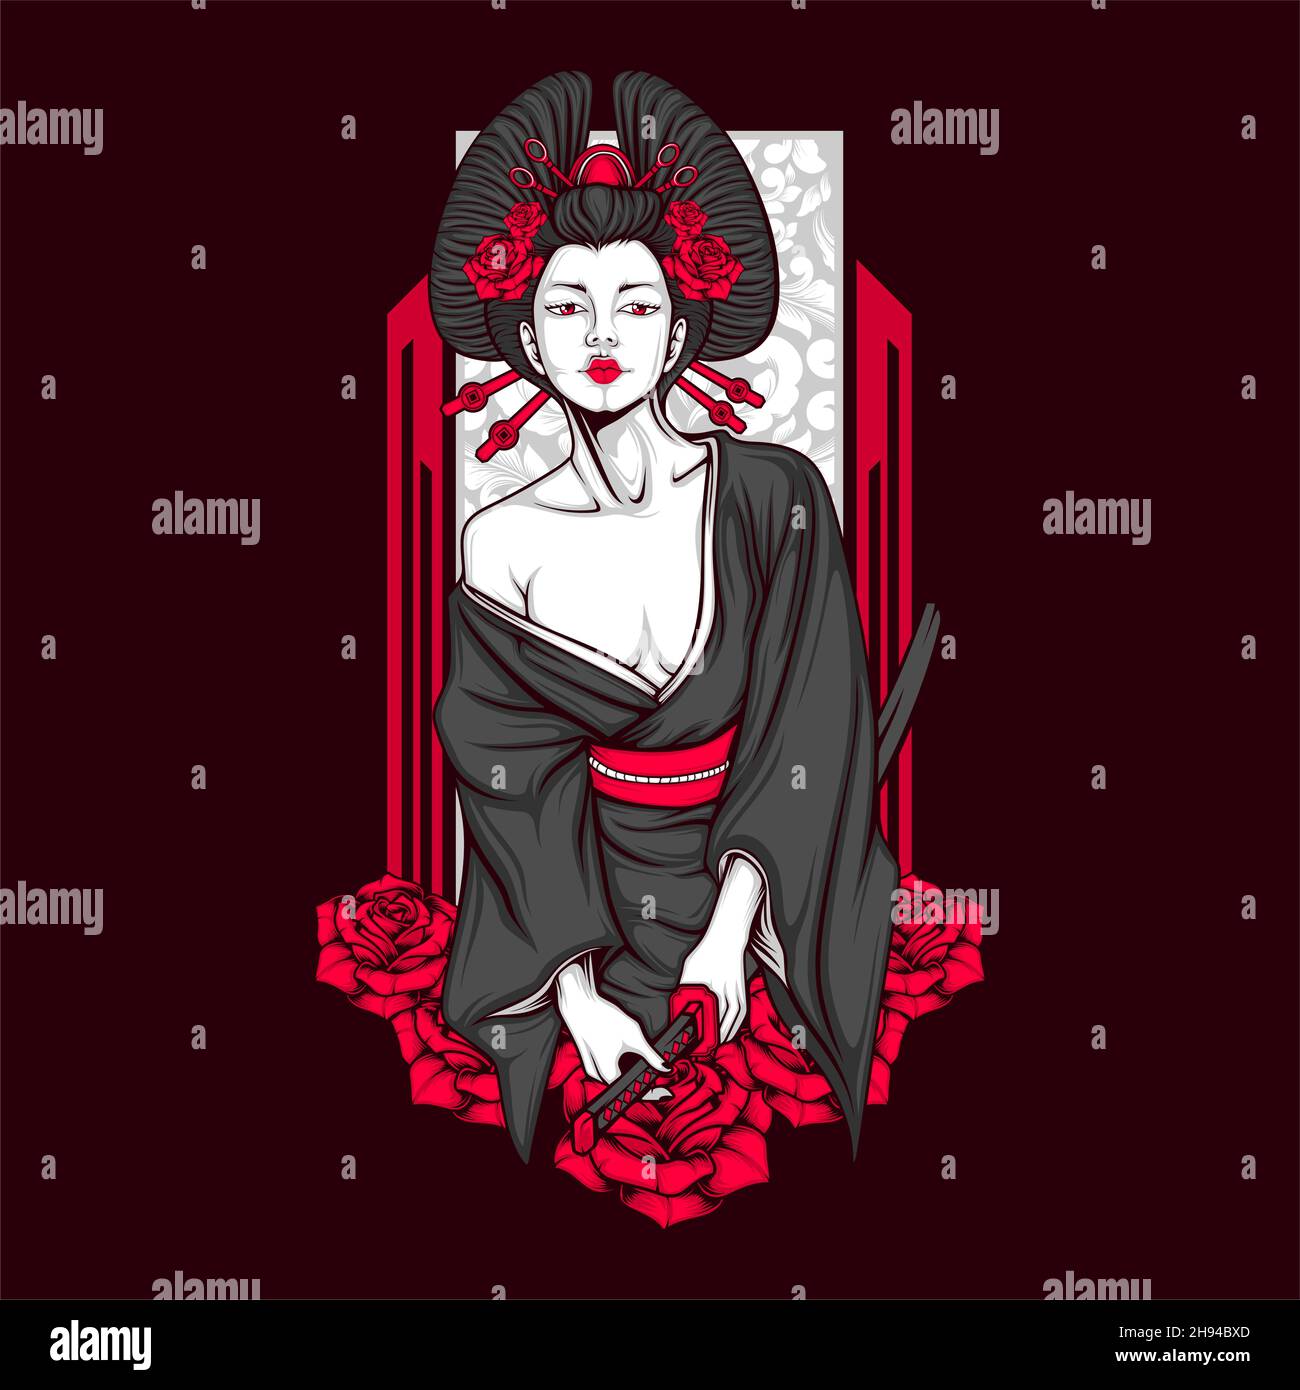 samurai geisha illustration with awesome background Stock Vector